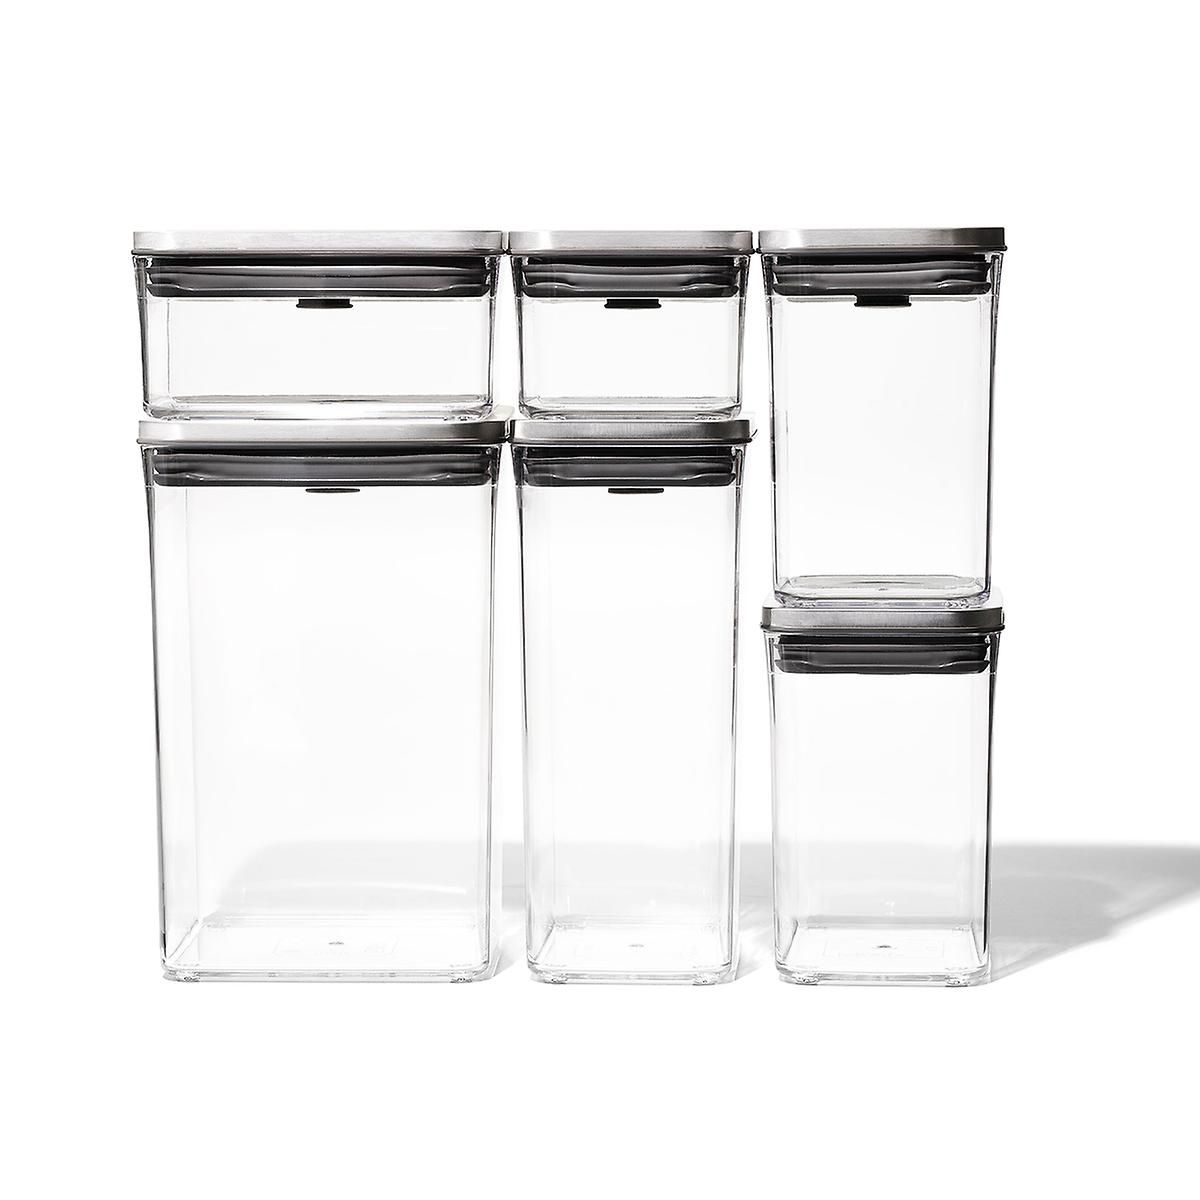 OXO Steel Pop Container Set of 6 | The Container Store